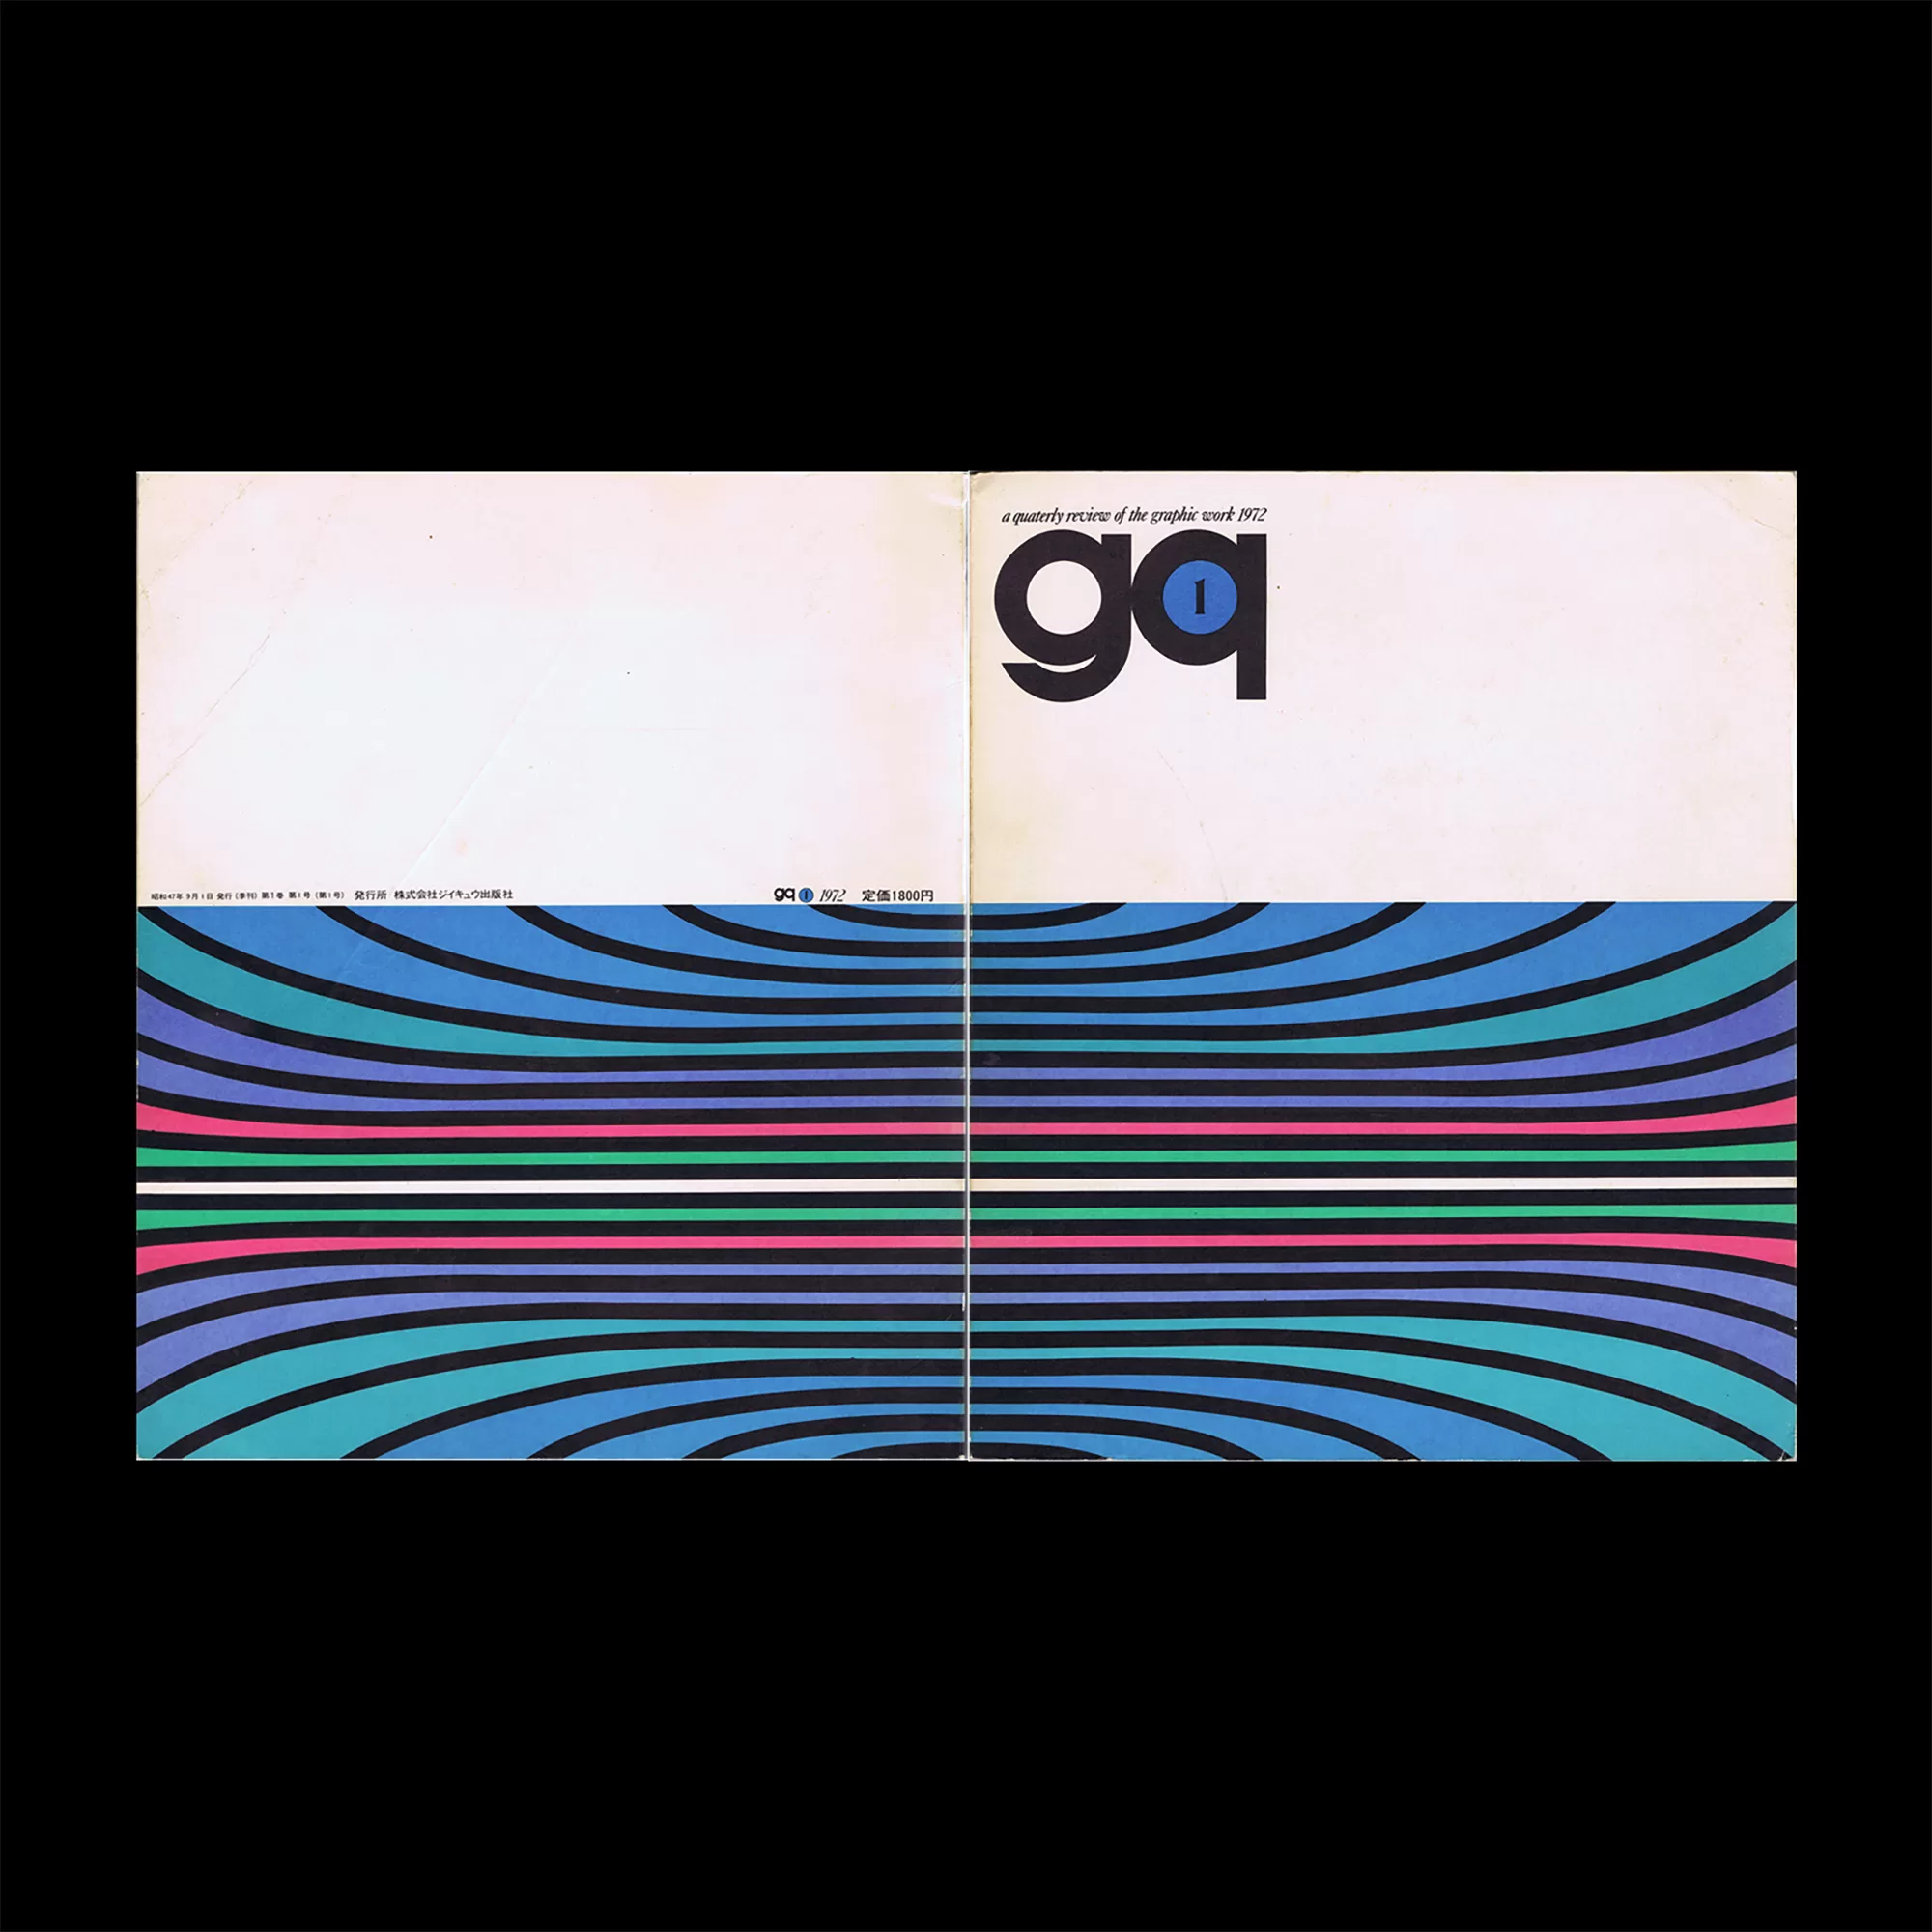 gq 01 - A Quarterly Review of the Graphic Work, 1972